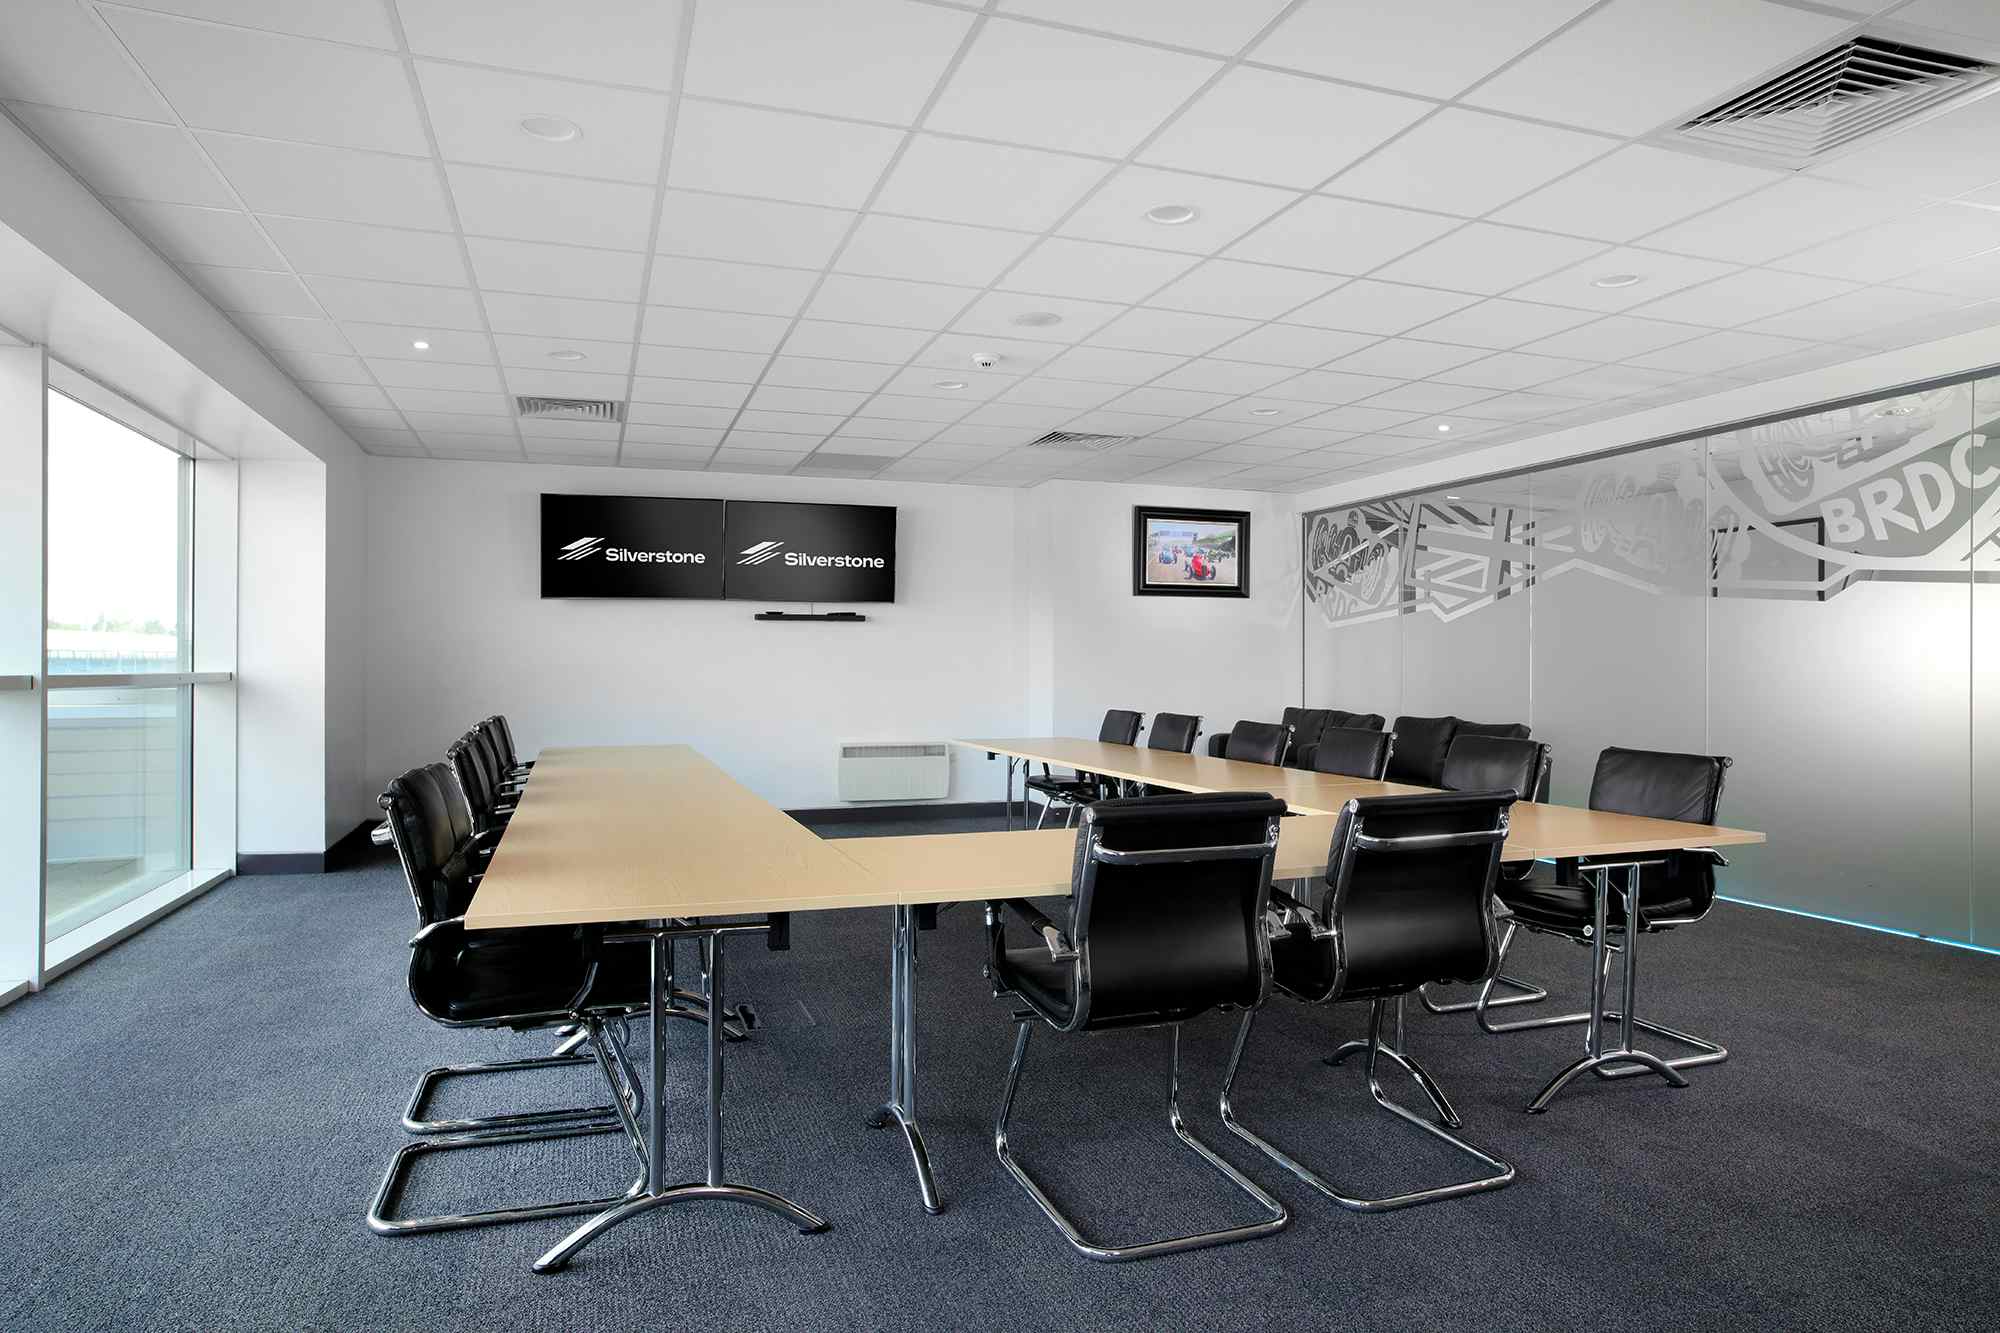 The President's Space, Silverstone International Conference & Exhibition Centre